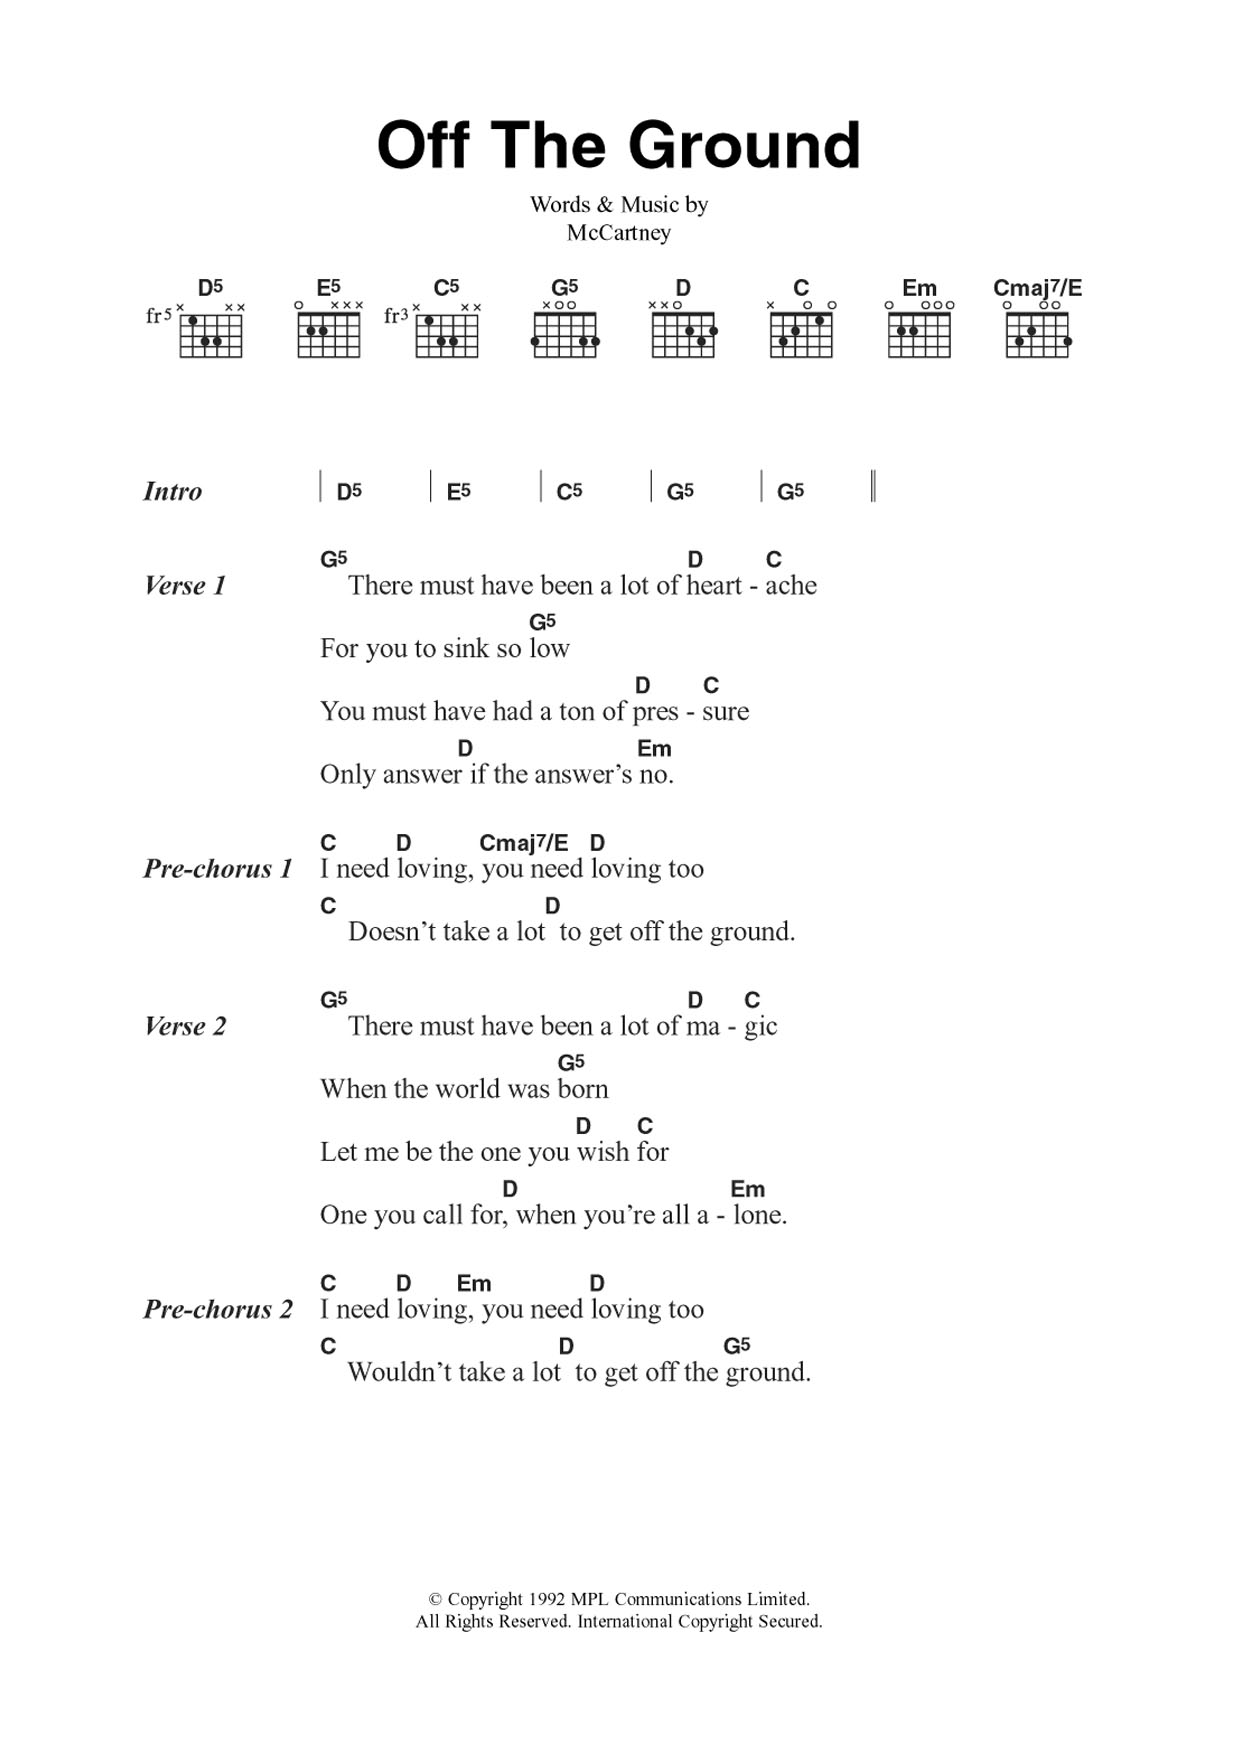 Download Paul McCartney Off The Ground Sheet Music